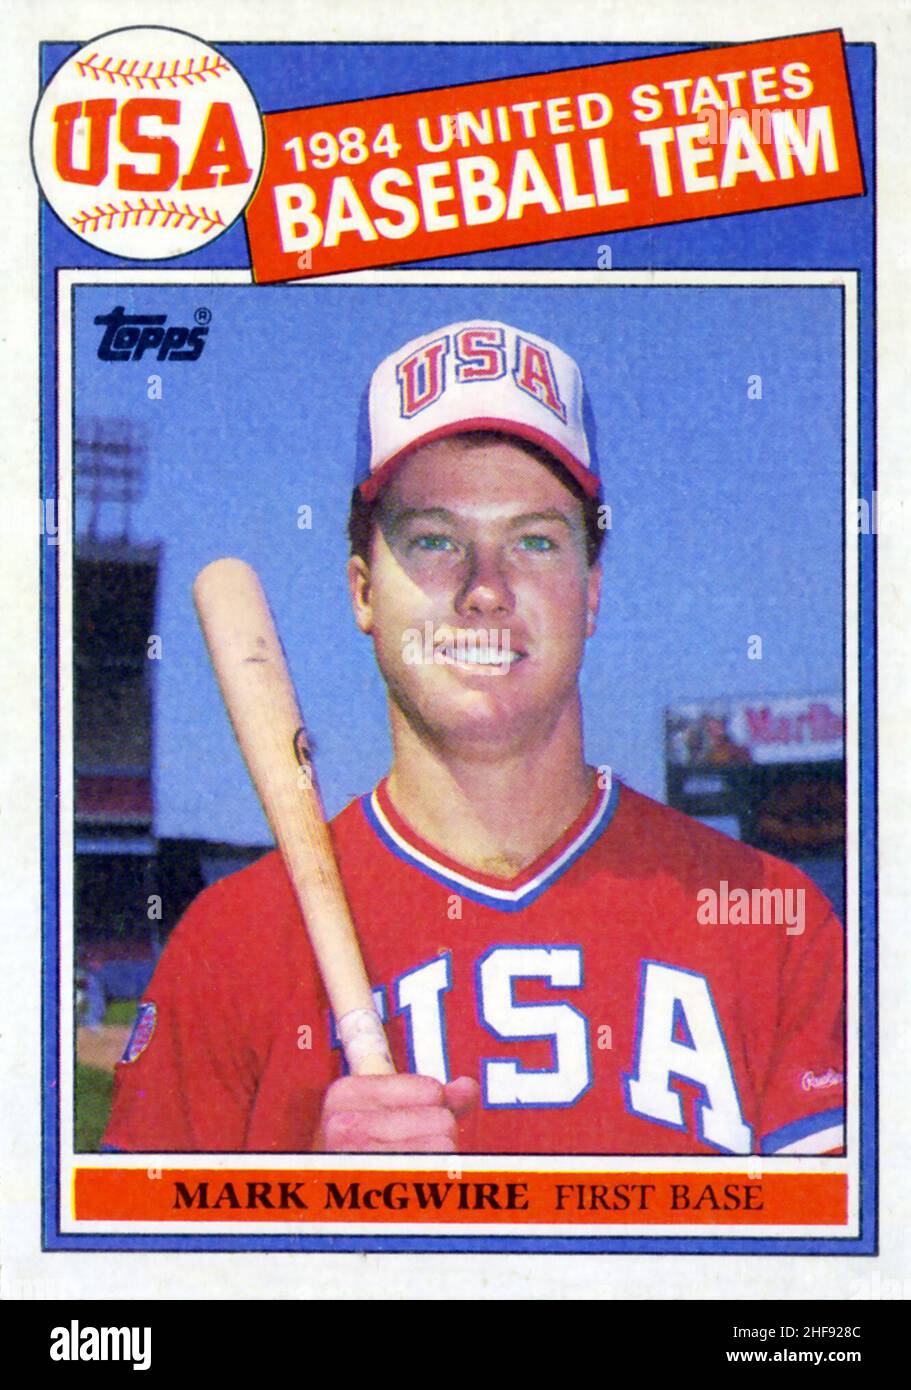 1985 Topps rookie card of Mark McGwire with the USA Olympic Baseball Team from 1984. Stock Photo